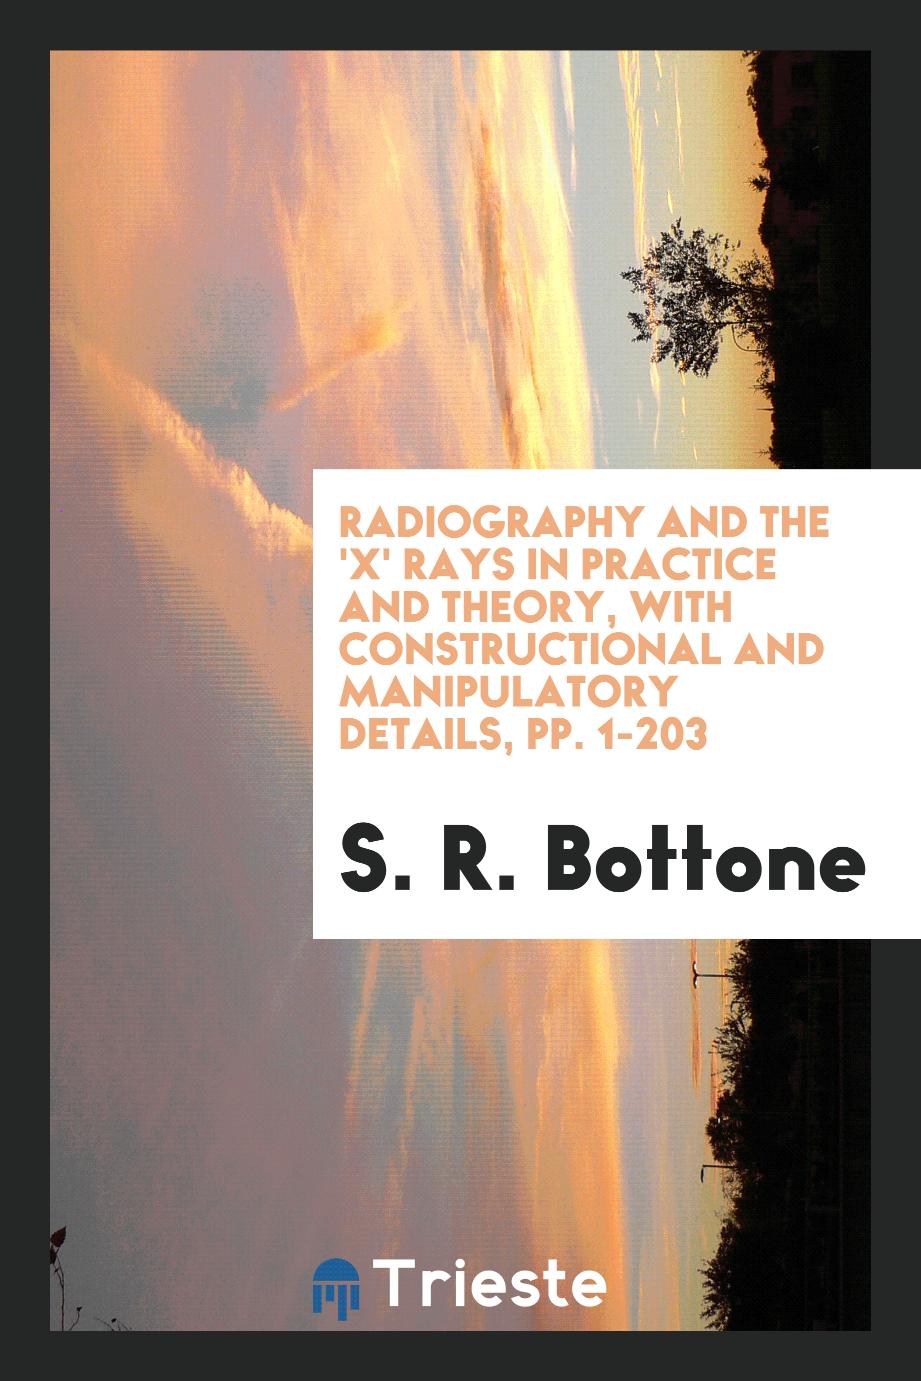 Radiography and the 'X' Rays in Practice and Theory, with Constructional and Manipulatory Details, pp. 1-203